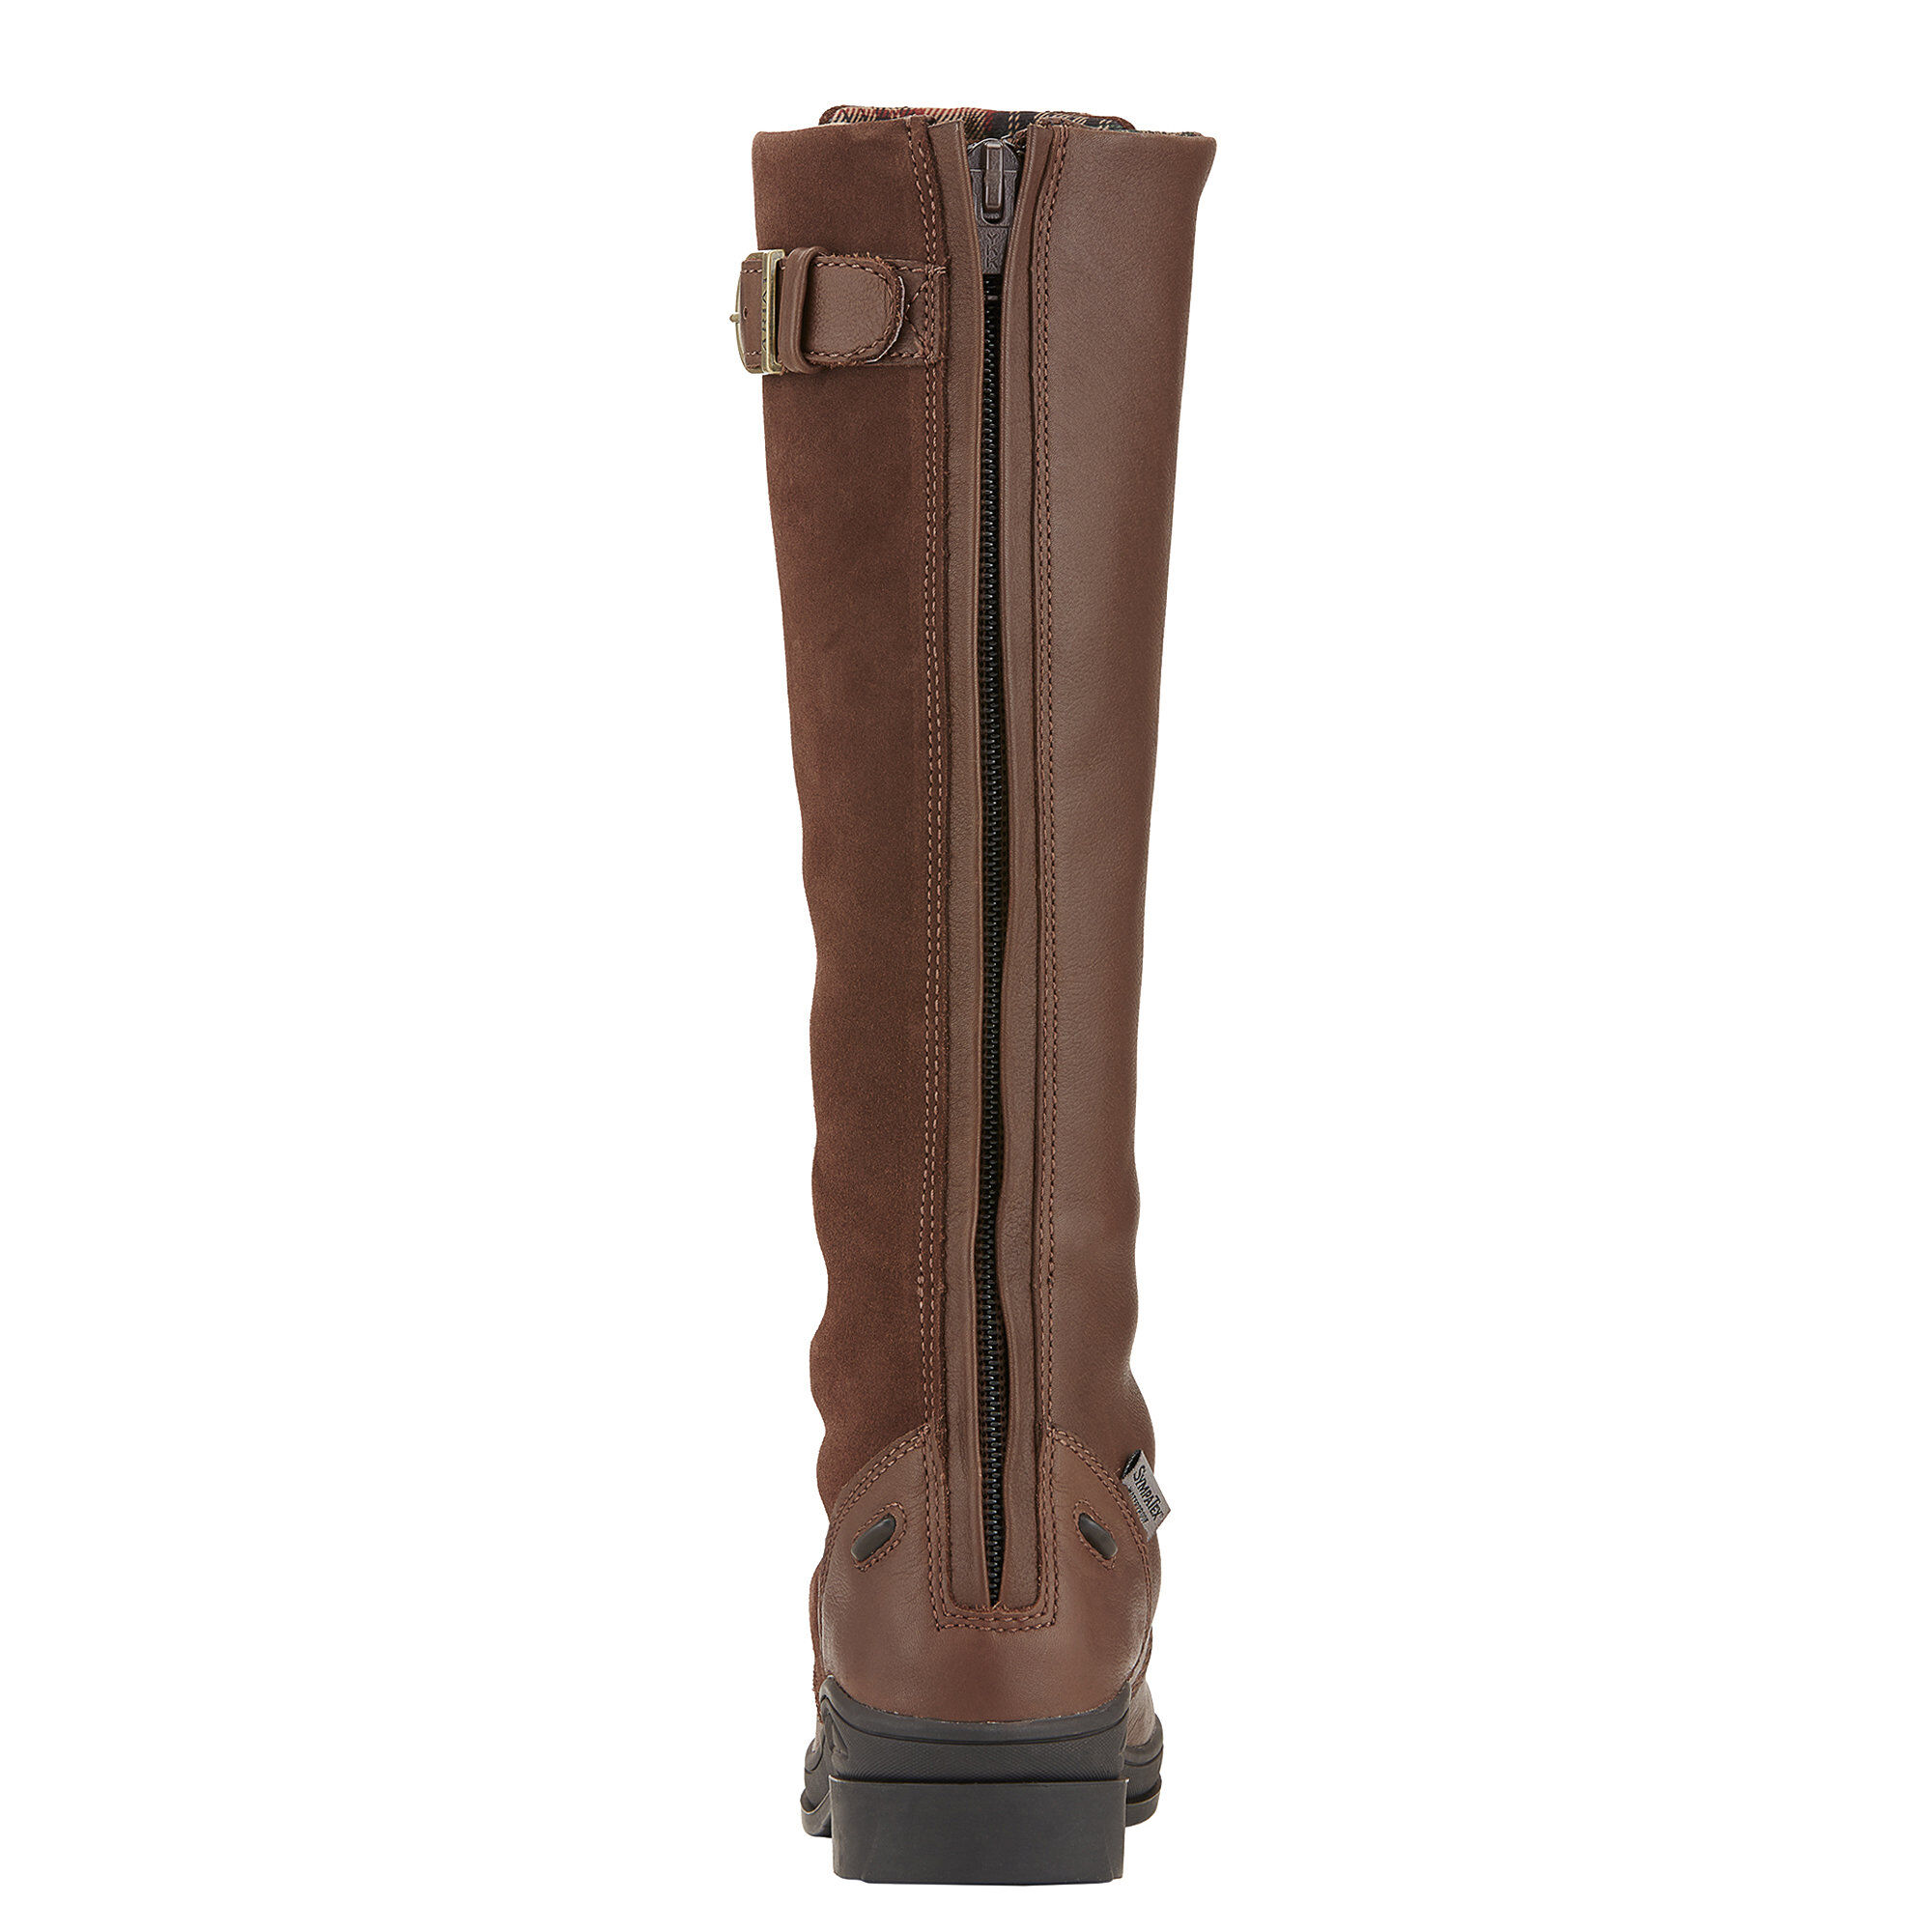 Coniston Waterproof Insulated Boot | Ariat